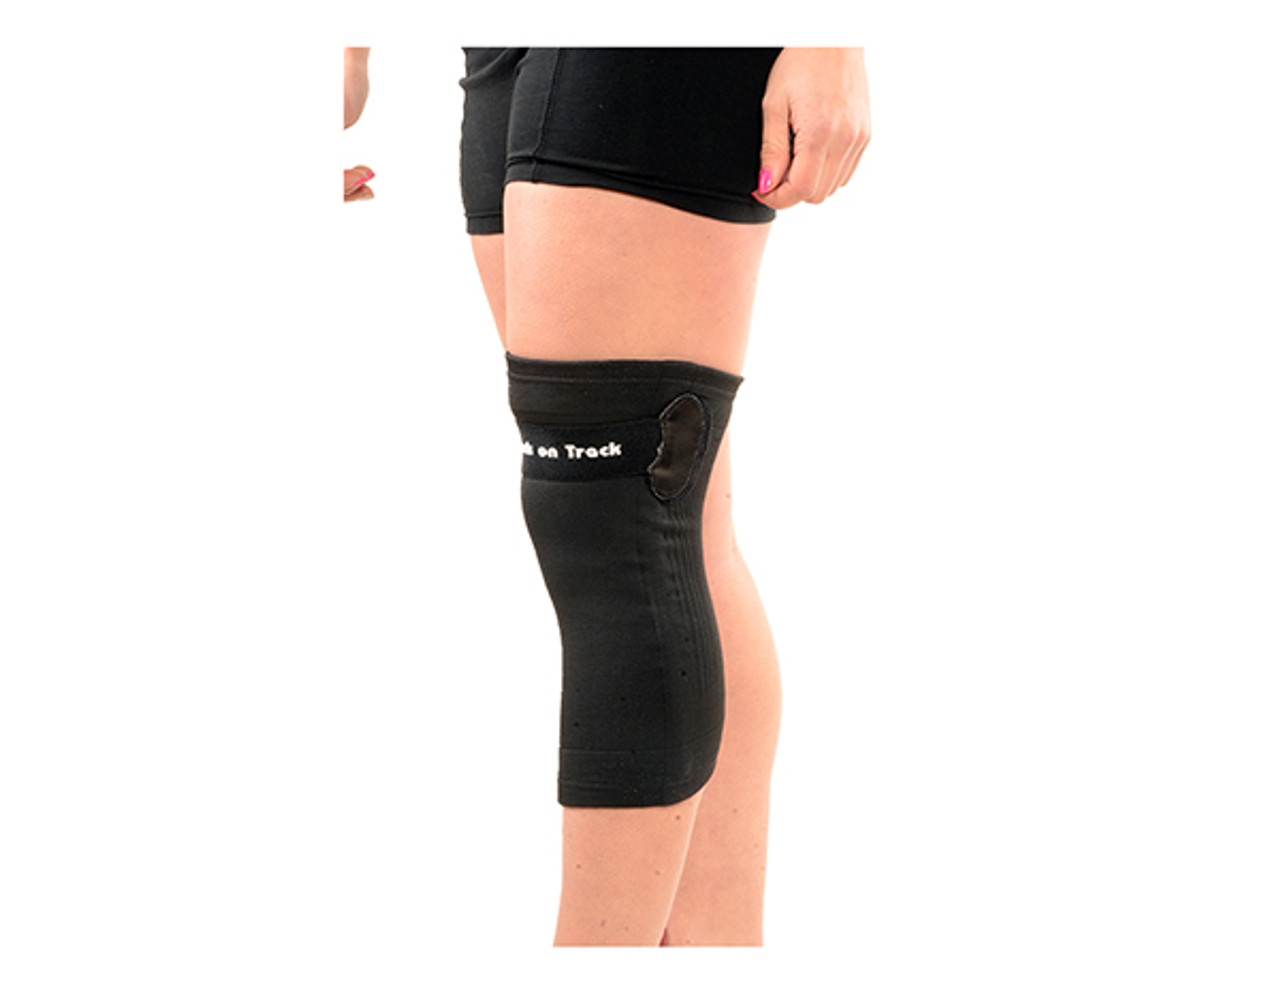 https://cdn11.bigcommerce.com/s-pyz6tx2vgx/images/stencil/1280x1280/products/2236/34268/Back-on-Track-Knee-Brace-with-Strap_BLK_1__00565.1632446285.jpg?c=1